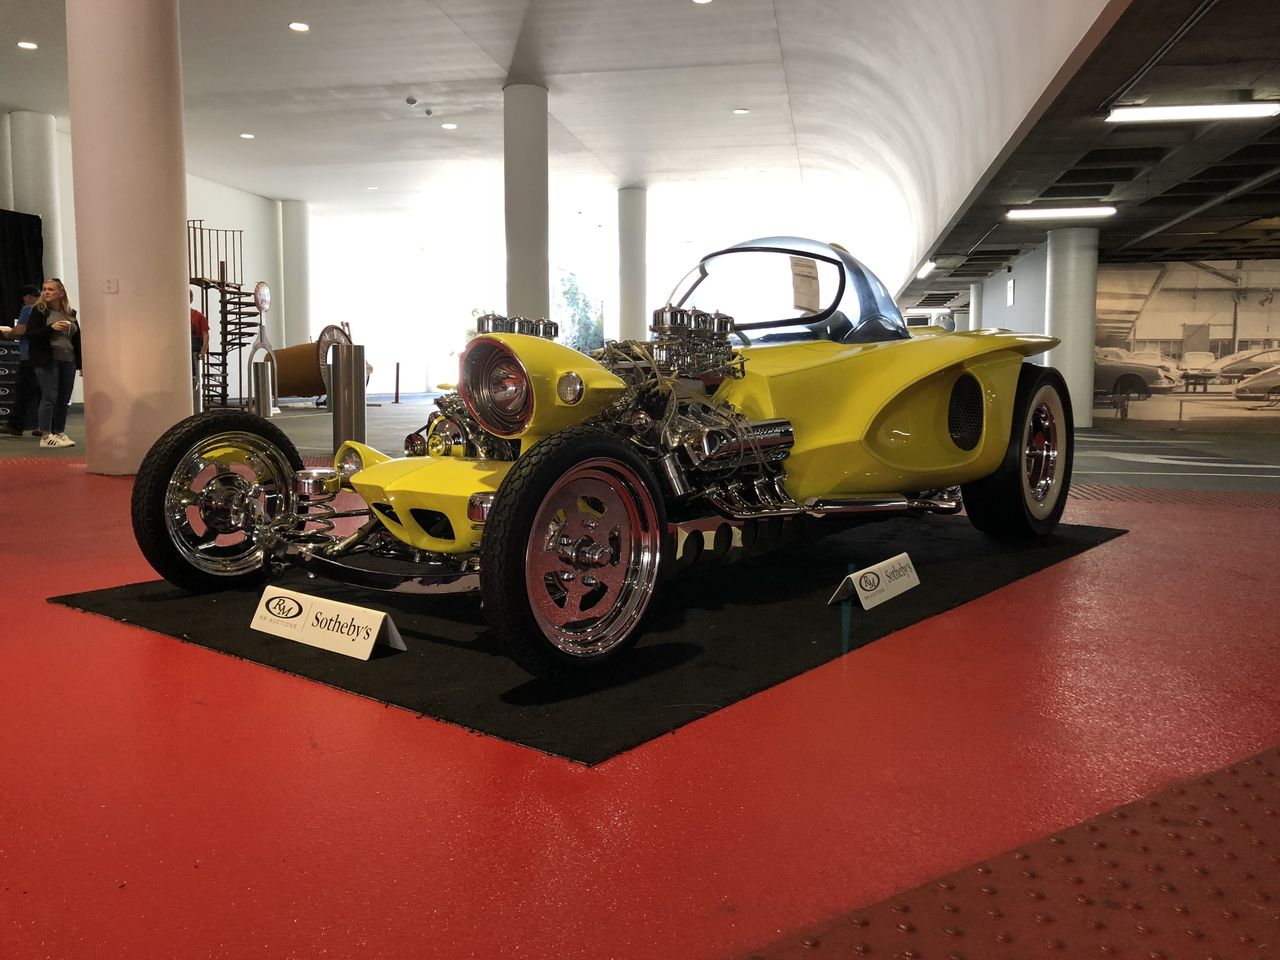 Designed before the days of 3D CAD software, this Ed Roth creation is something you very much have to view in the flesh to fully appreciate 